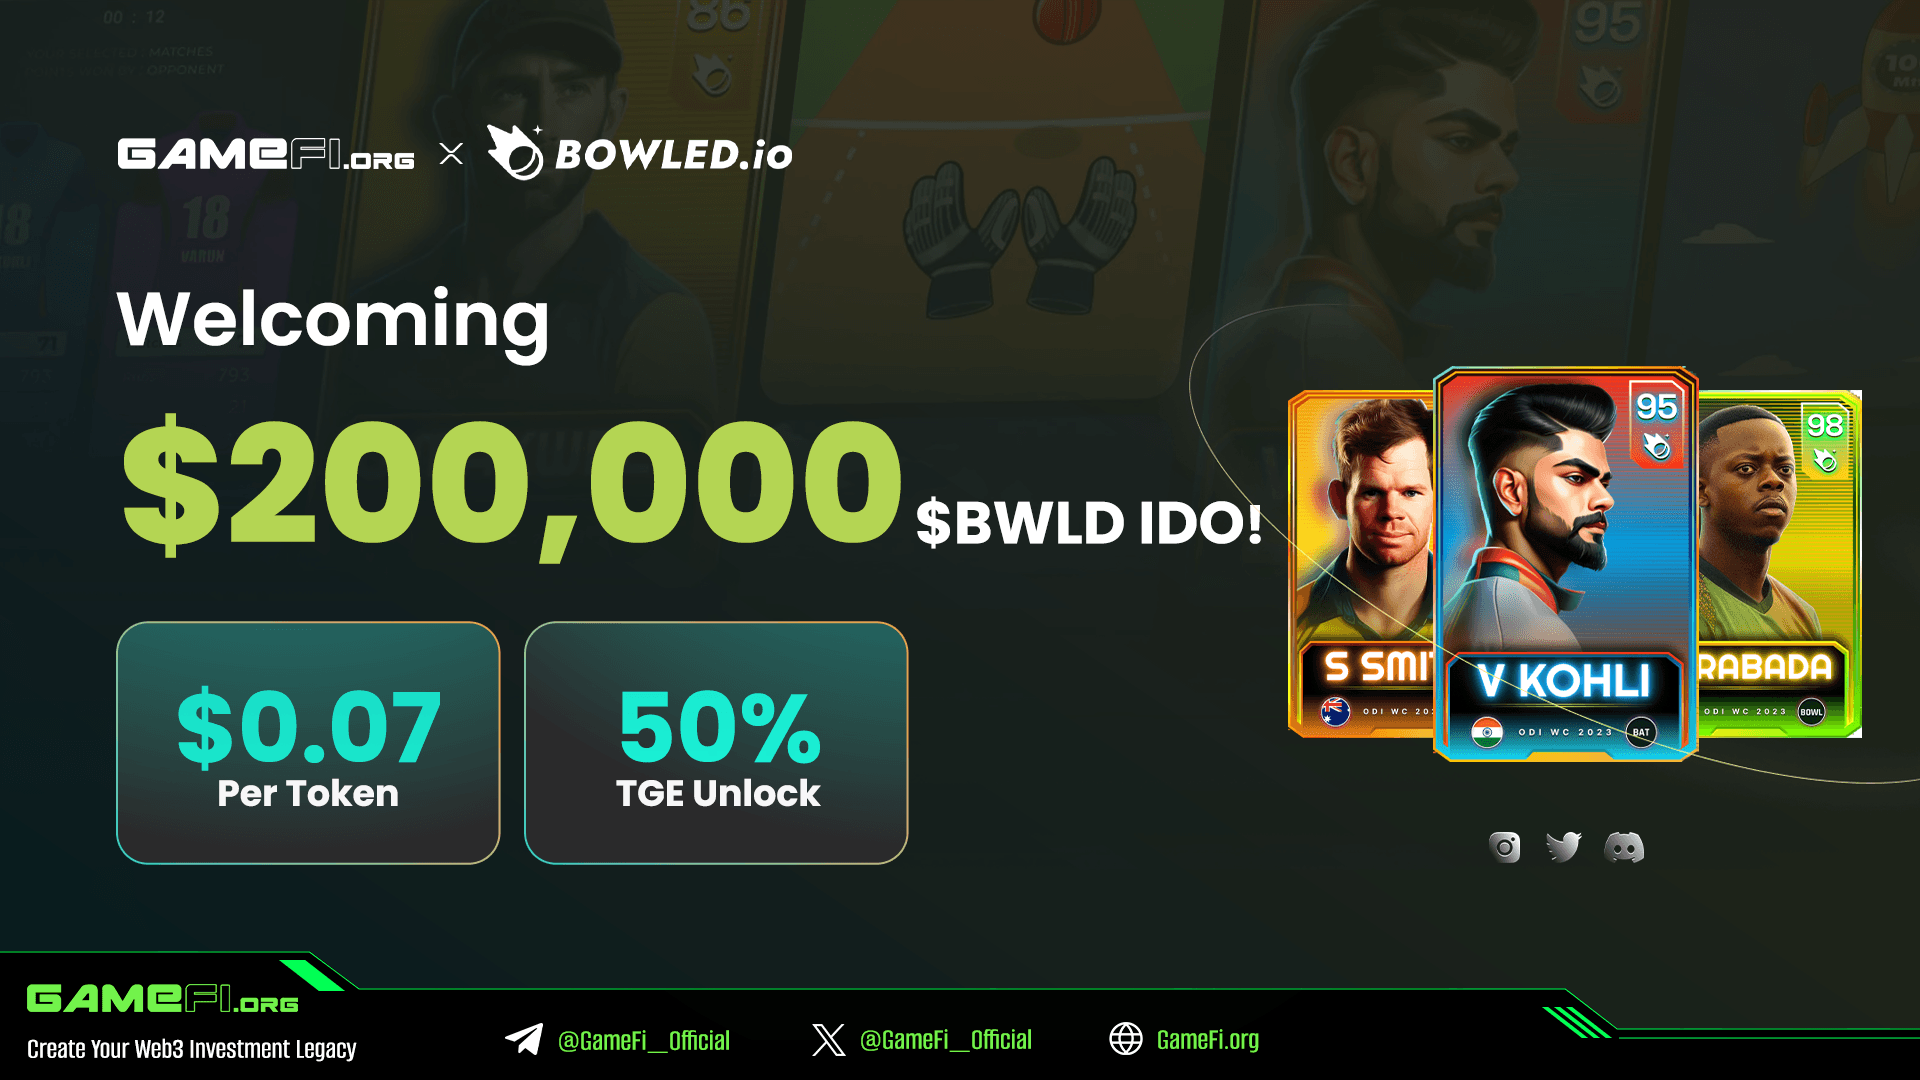 Crafting The Future Of Sports Gaming With Bowled - Join $200,000 $BWLD IDO on GameFi.org